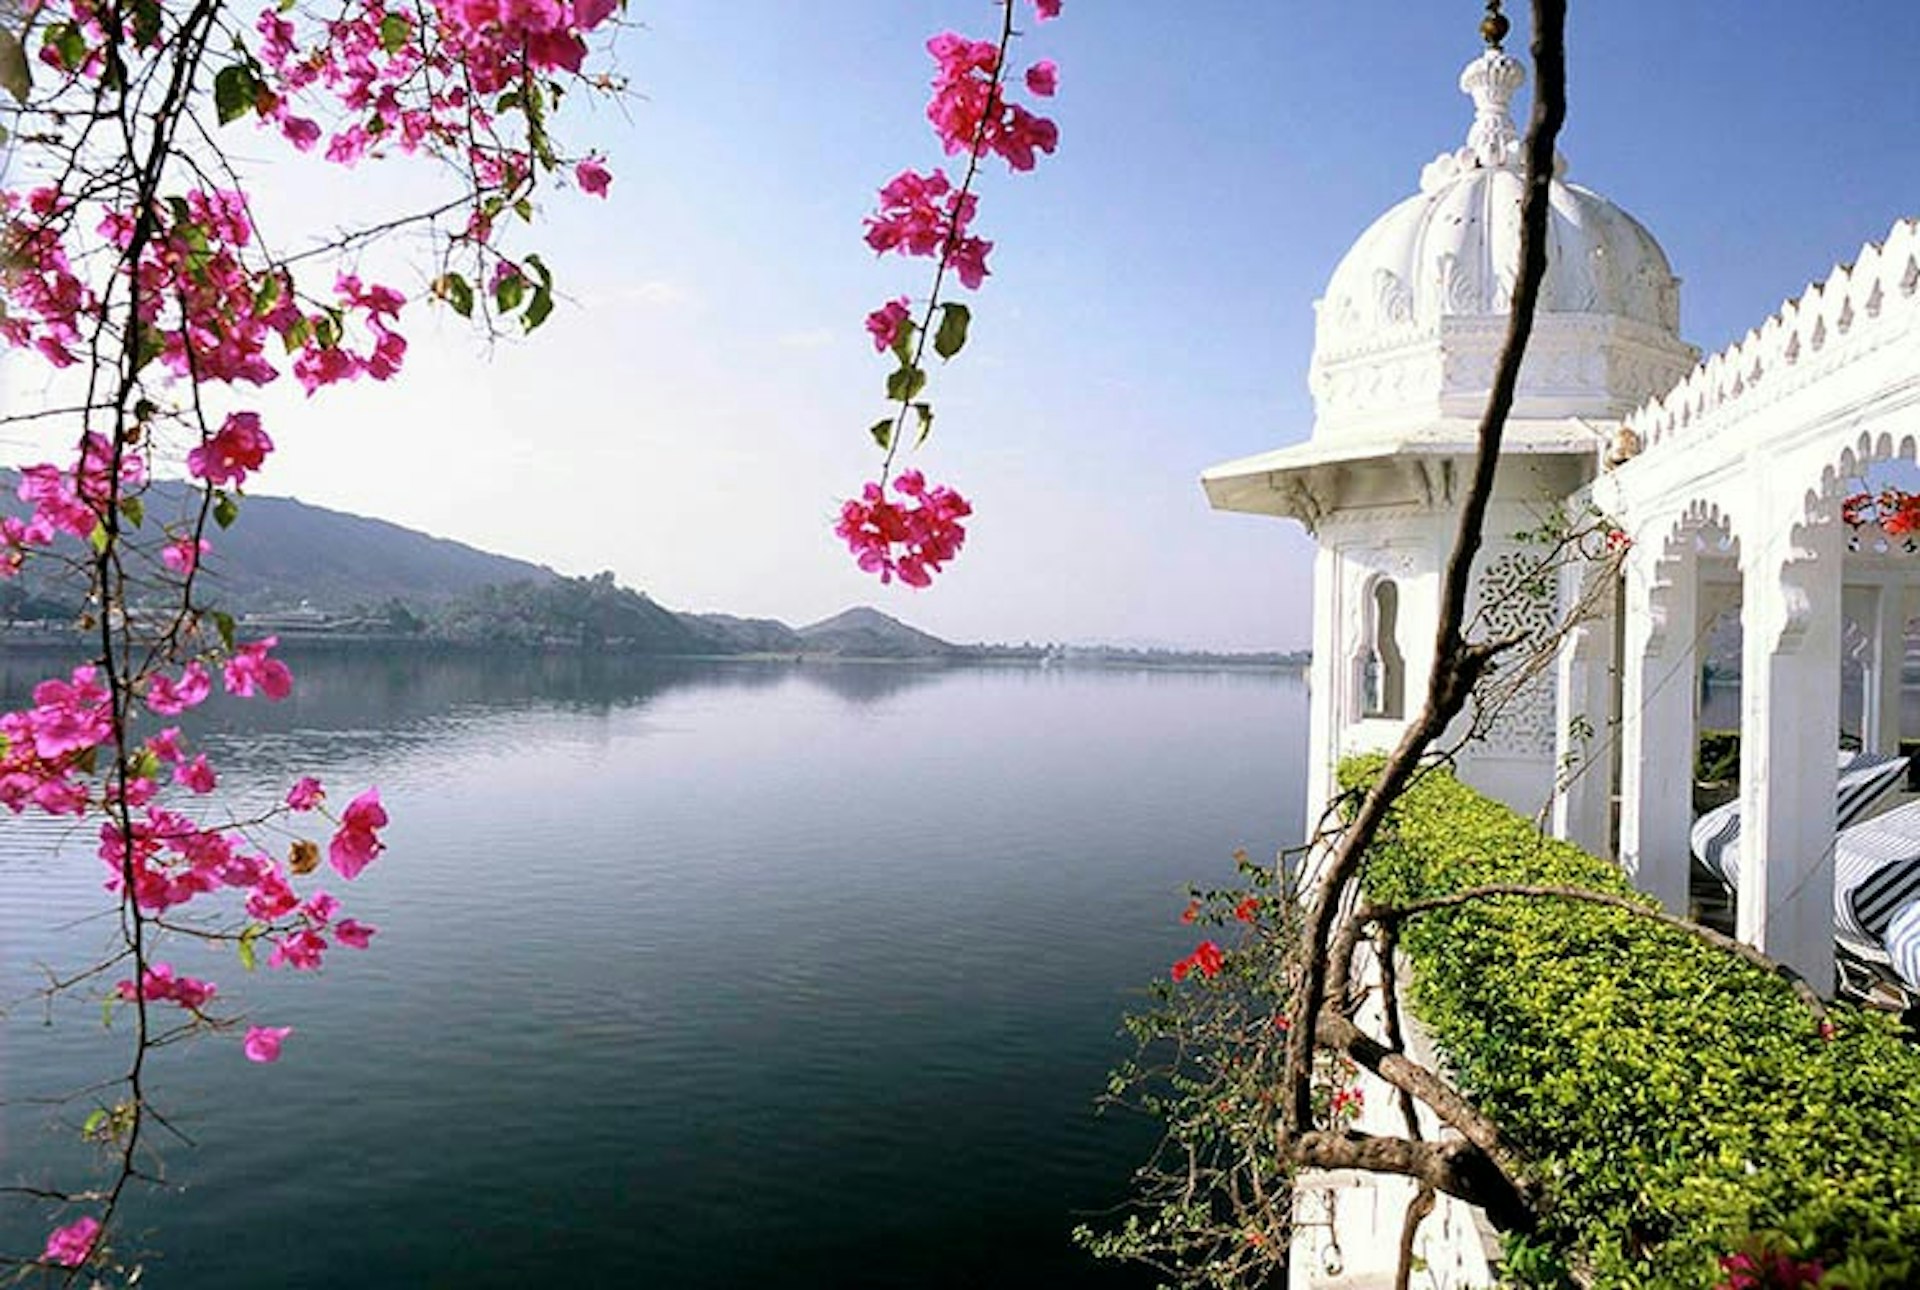 A hotel on its very own island - enjoy the grandeur and seclusion of the Lake Palace Hotel to woo your would-be spouse. Image by Chris Caldicott / Axiom Photographic Agency / Getty Images